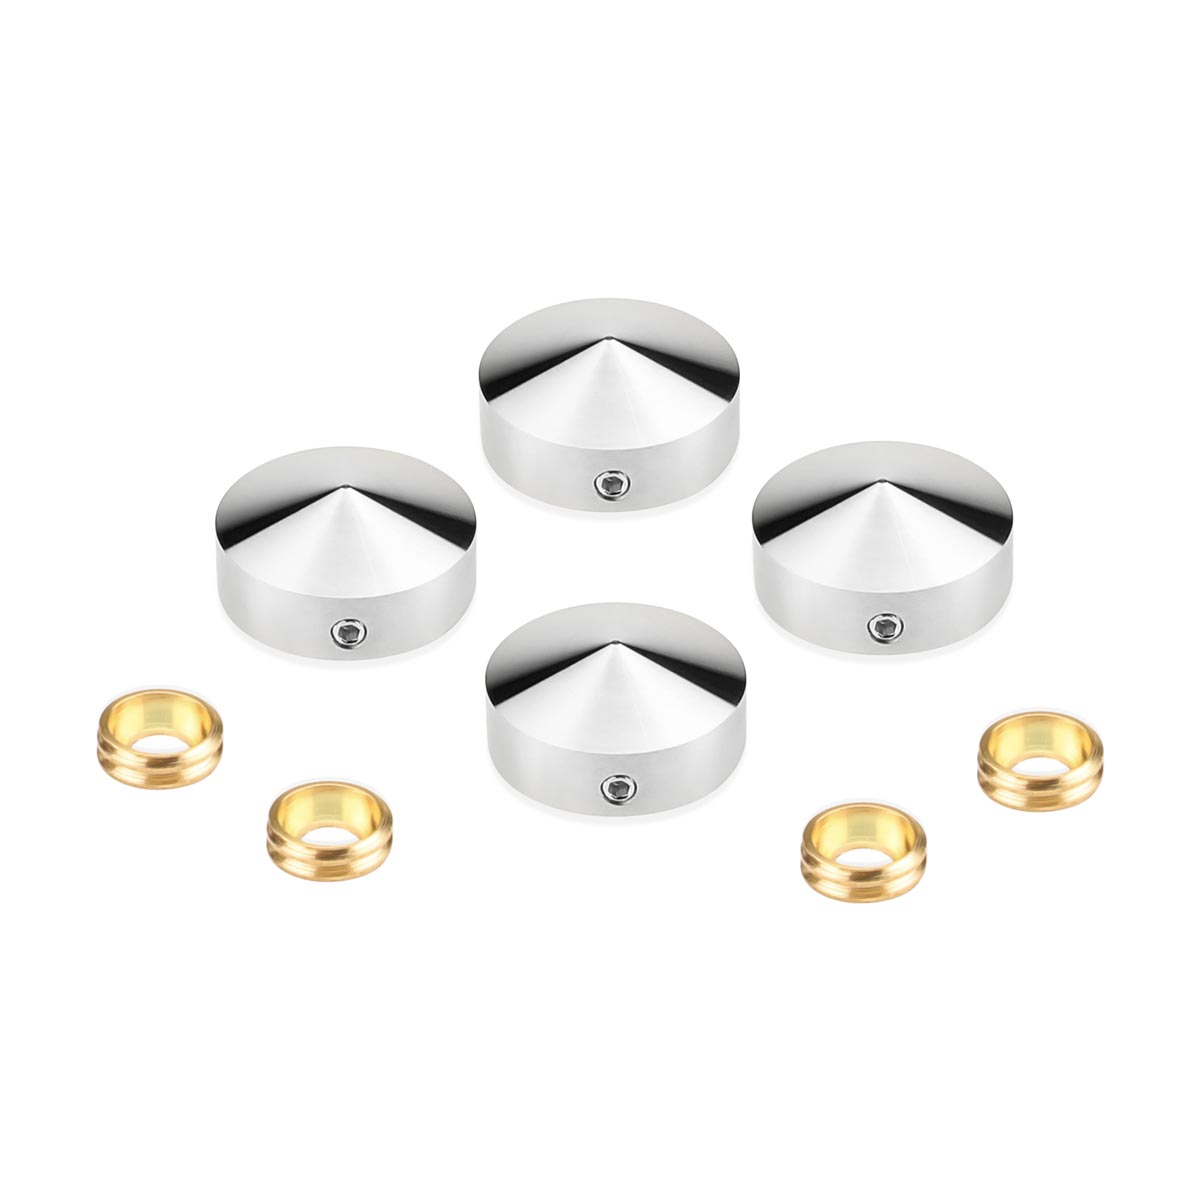 Set of 4 Conical Locking Screw Cover Diameter 7/8'', Satin Brushed Stainless Steel Finish (Indoor or Outdoor)